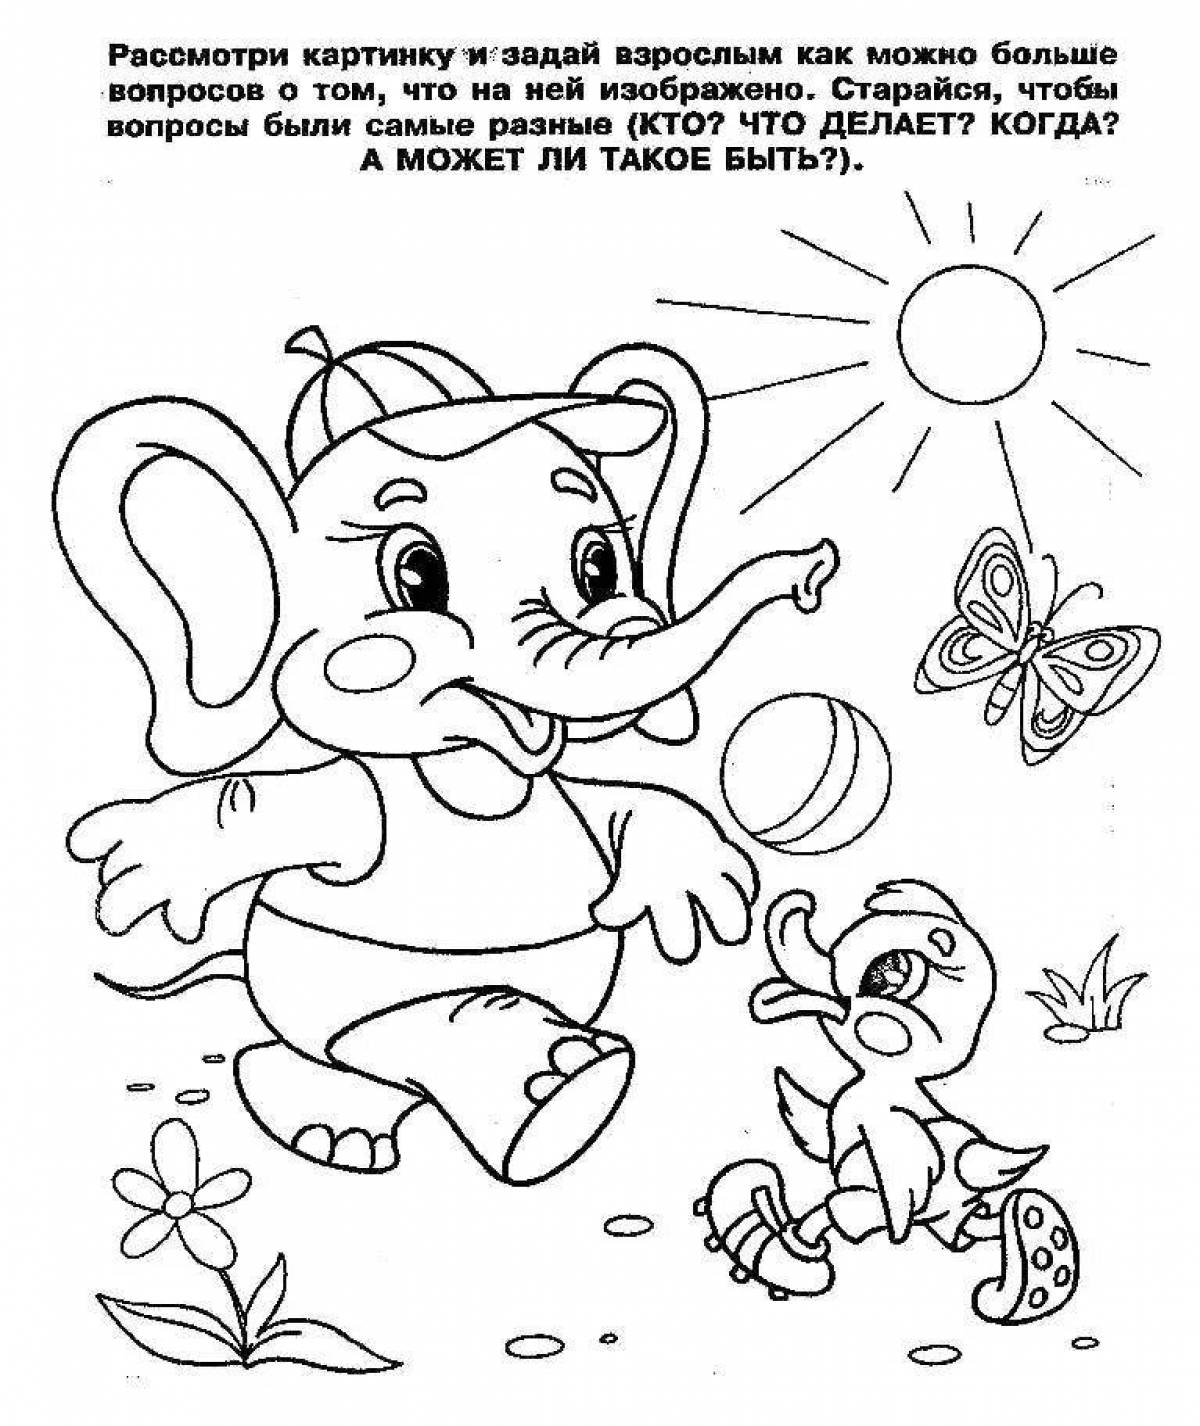 Fun coloring book for children 6-7 years old